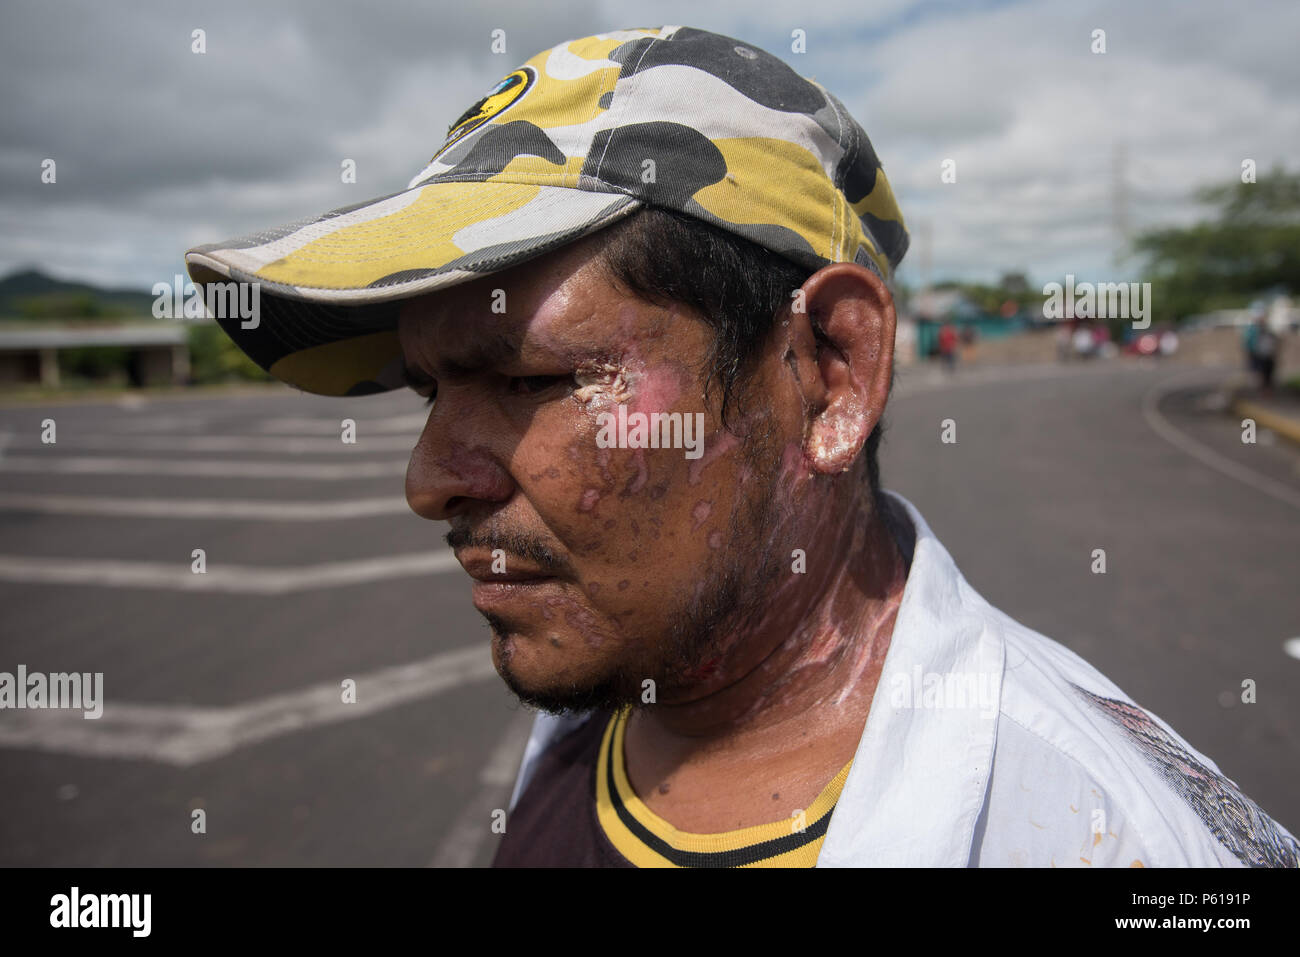 27 June 2018, Nicaragua, Chontales: A man shows burnings caused during the  clashes with a barricade. Citizens and farm workers blocked a country road  from Managua to Chontales. The blockades are part